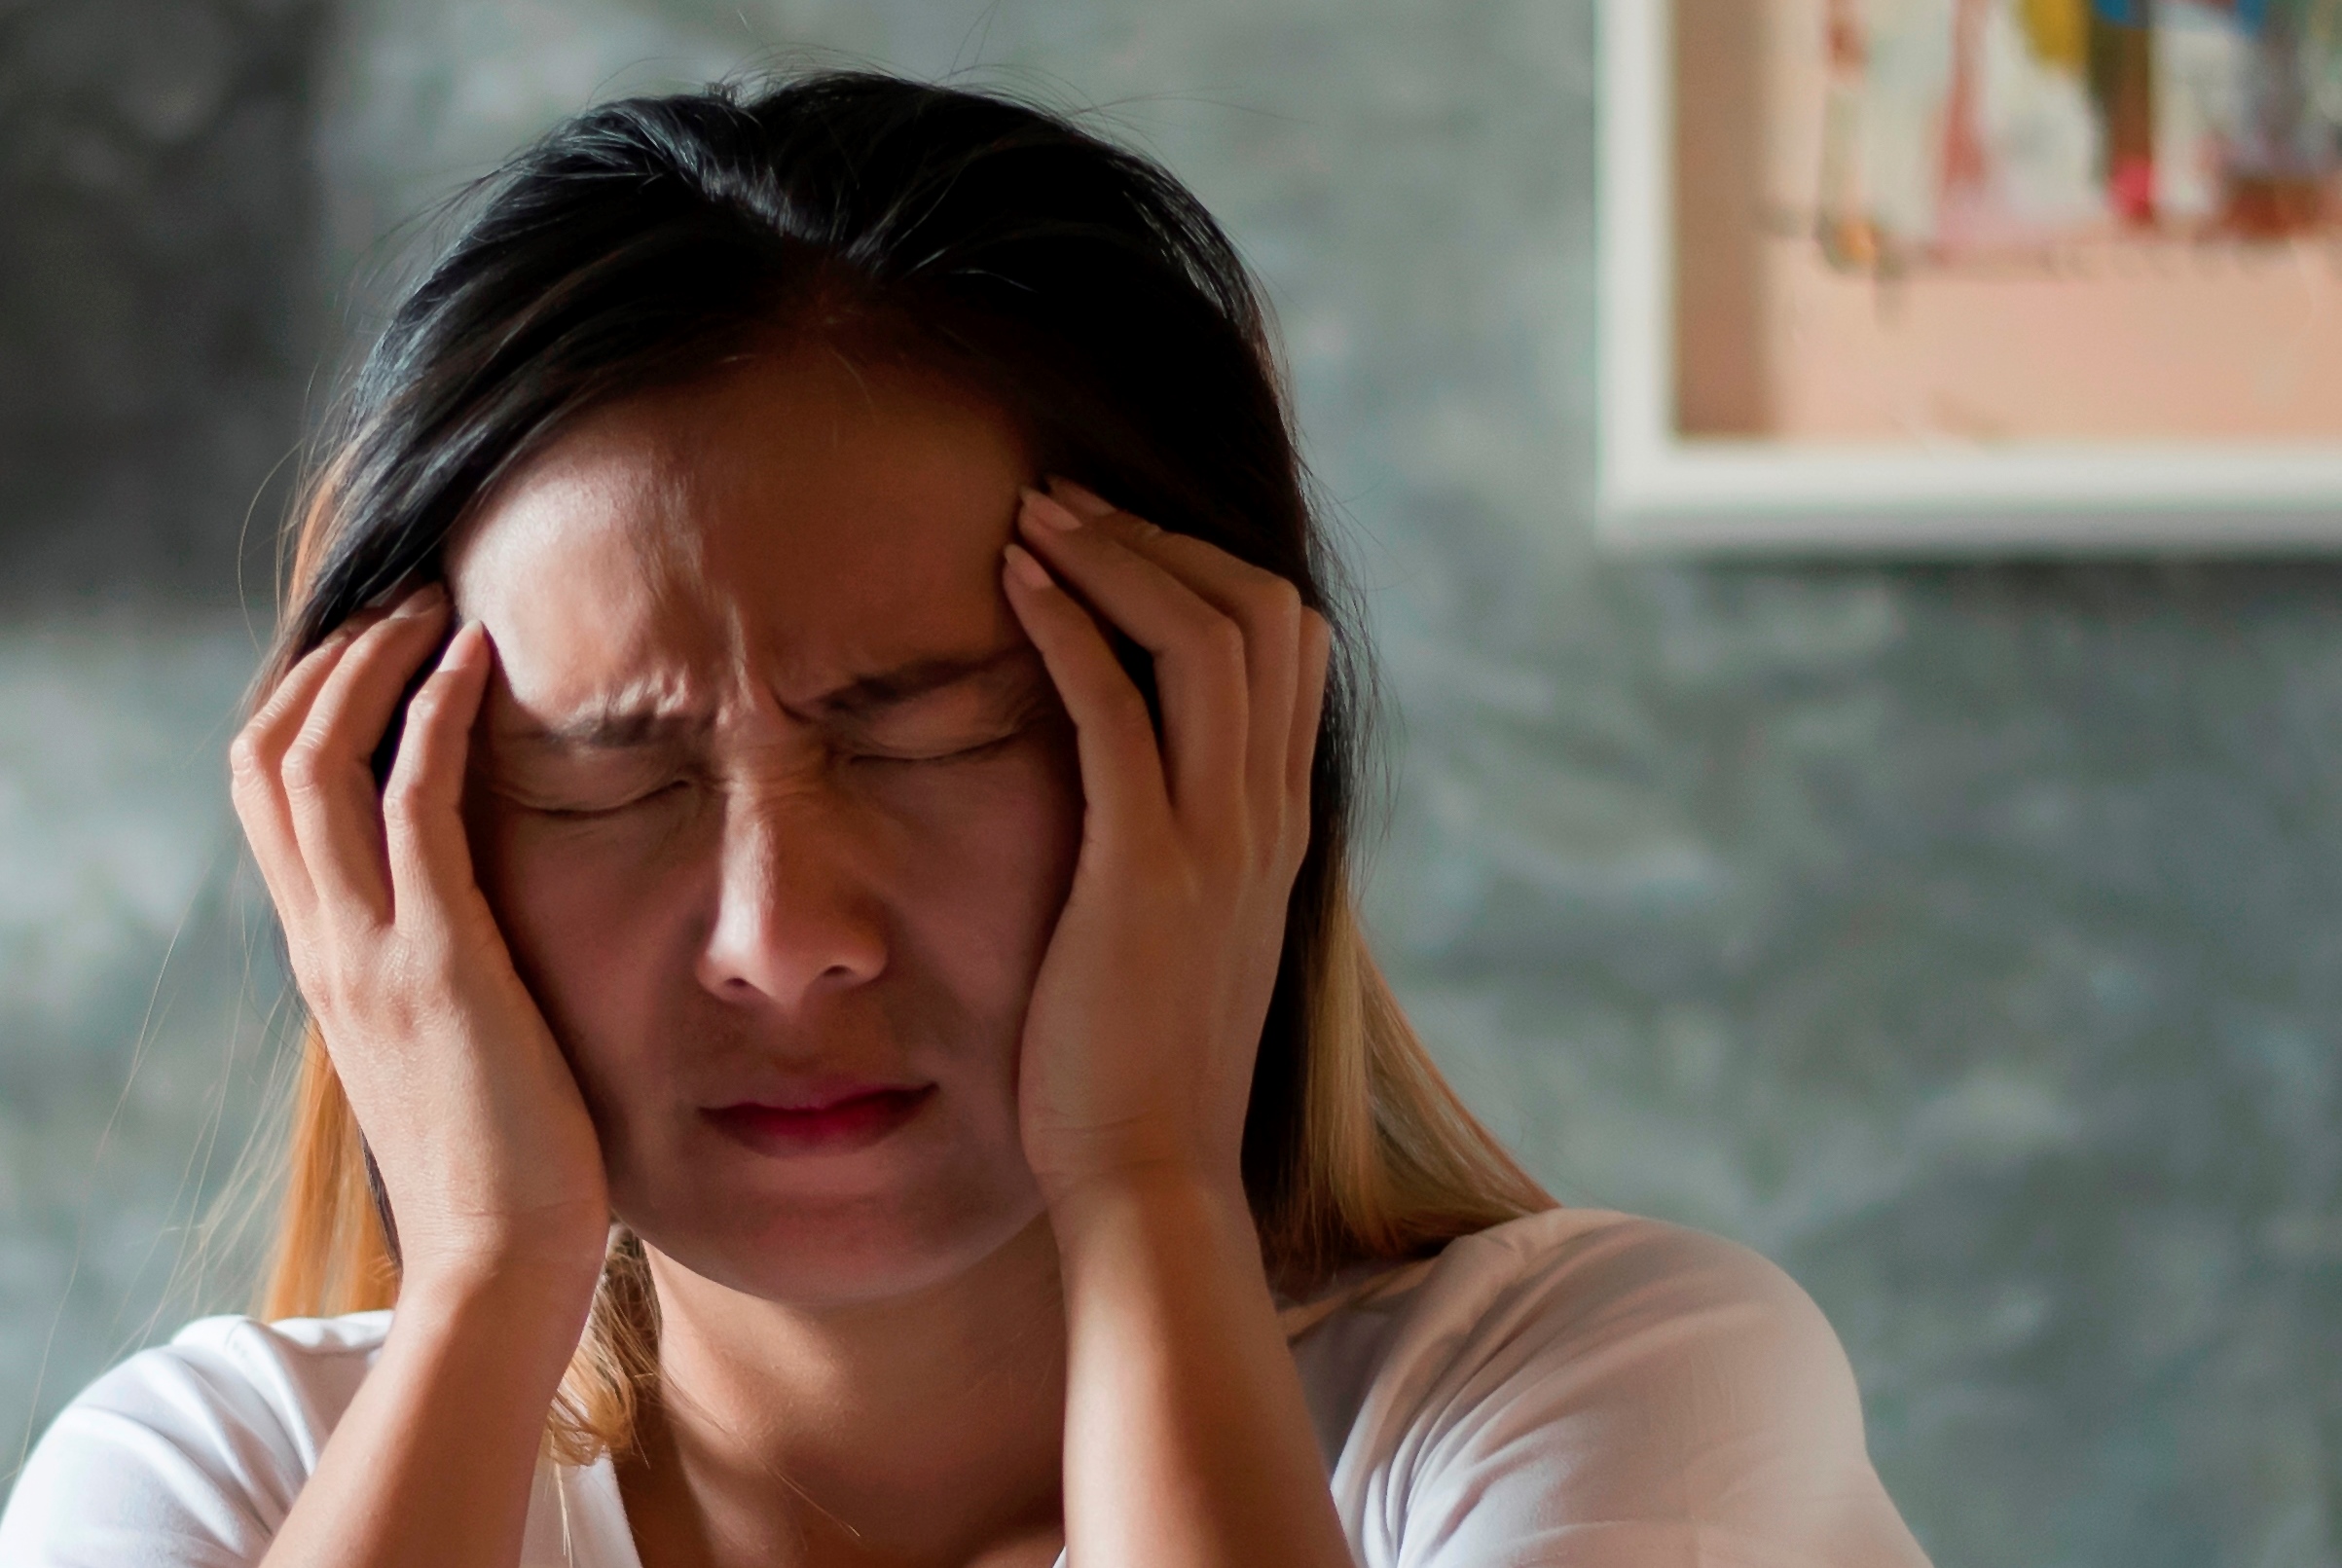 Is There a Link Between MS and Migraine Headache?